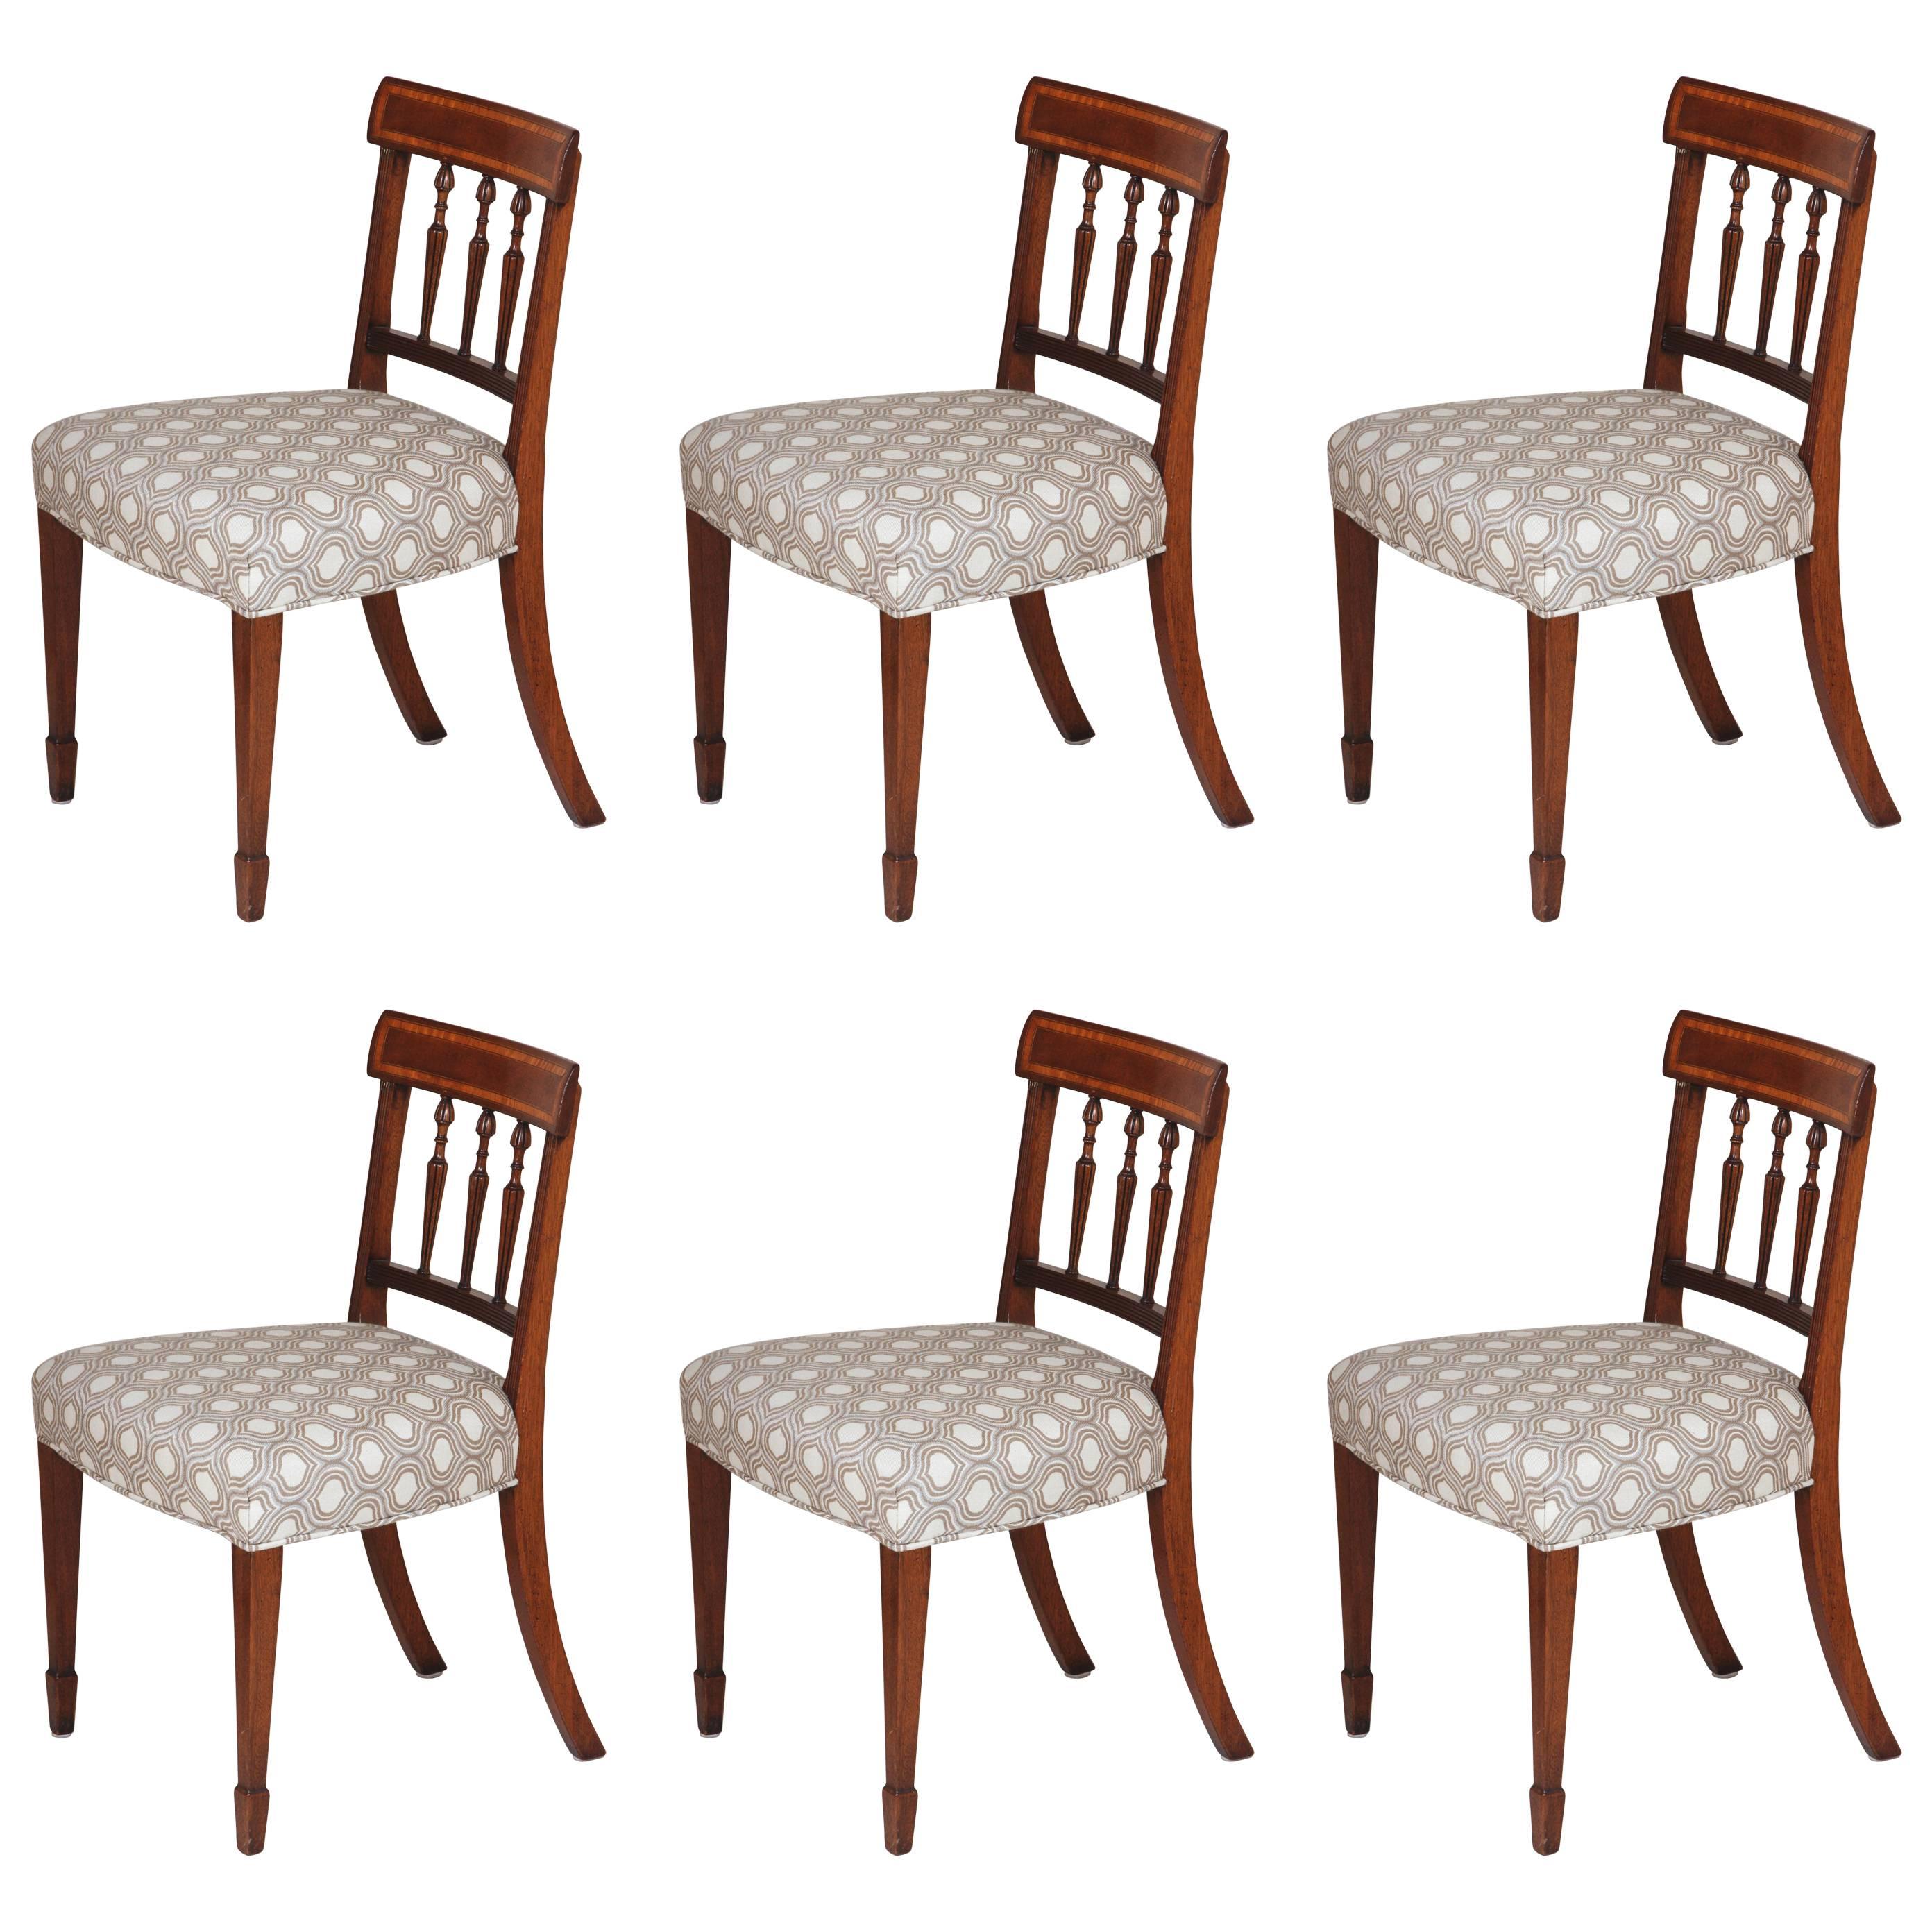 Set of Six Wooden Chairs For Sale